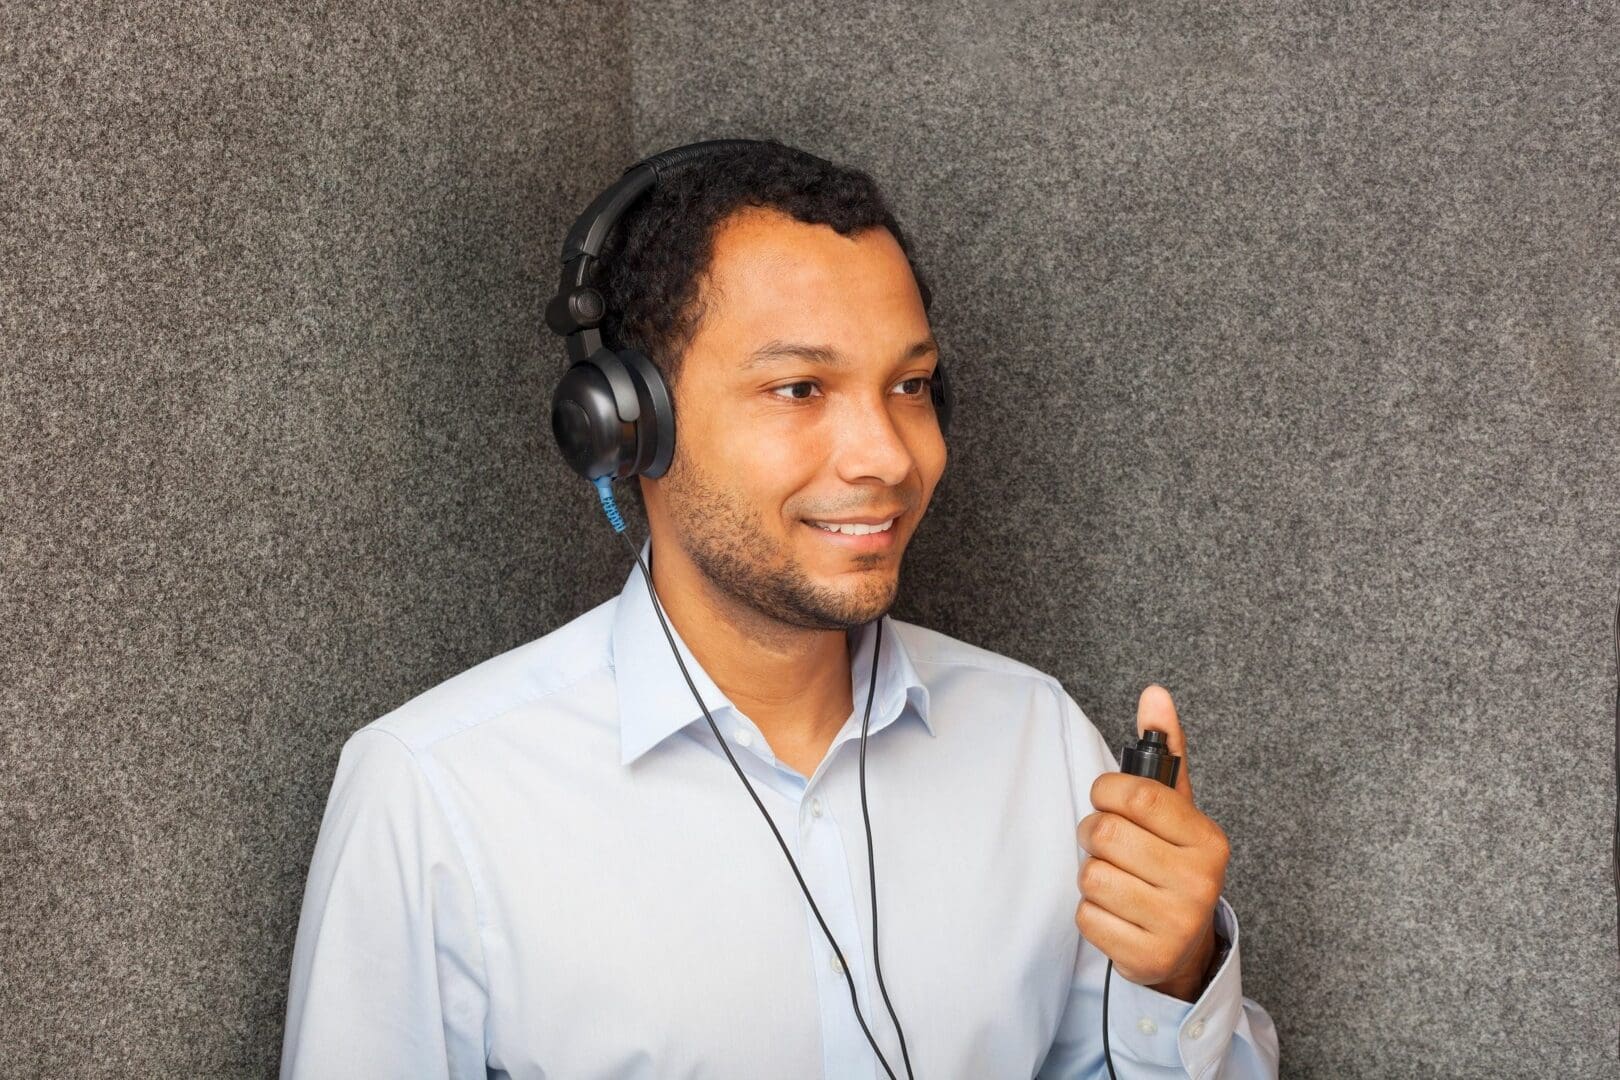 A man with headphones on holding a cell phone.